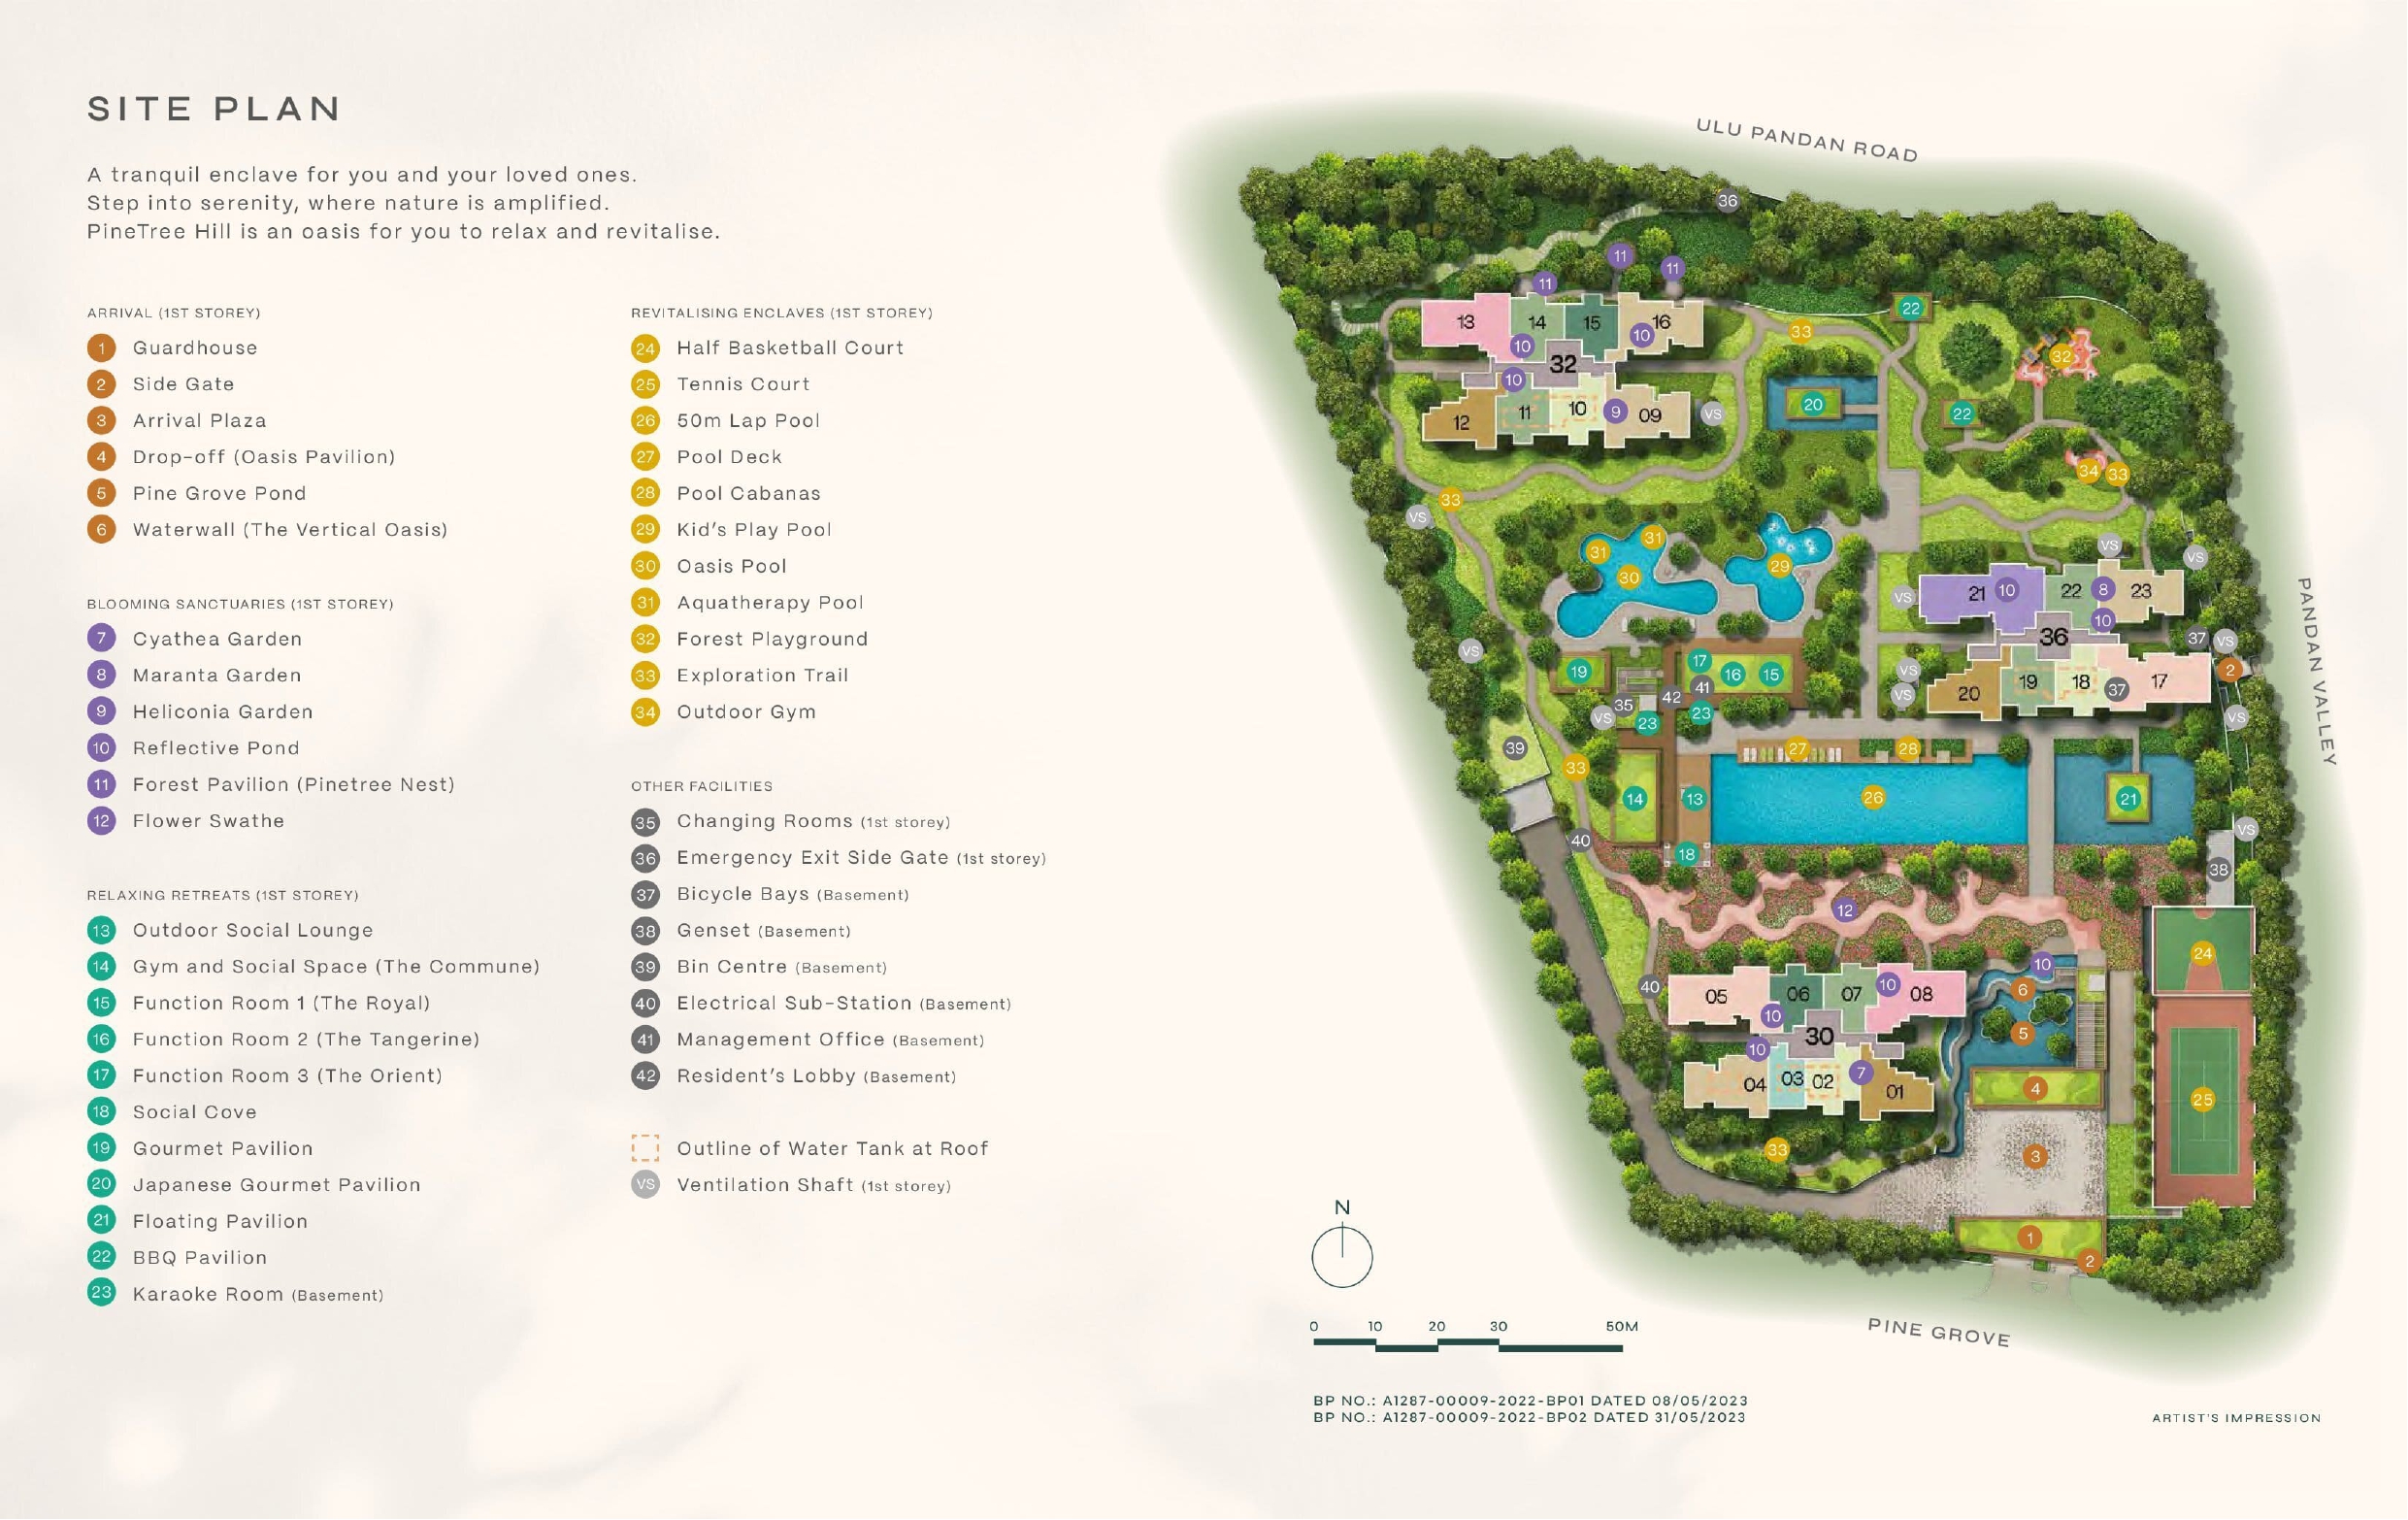 pinetree-hill-site-map-singapore